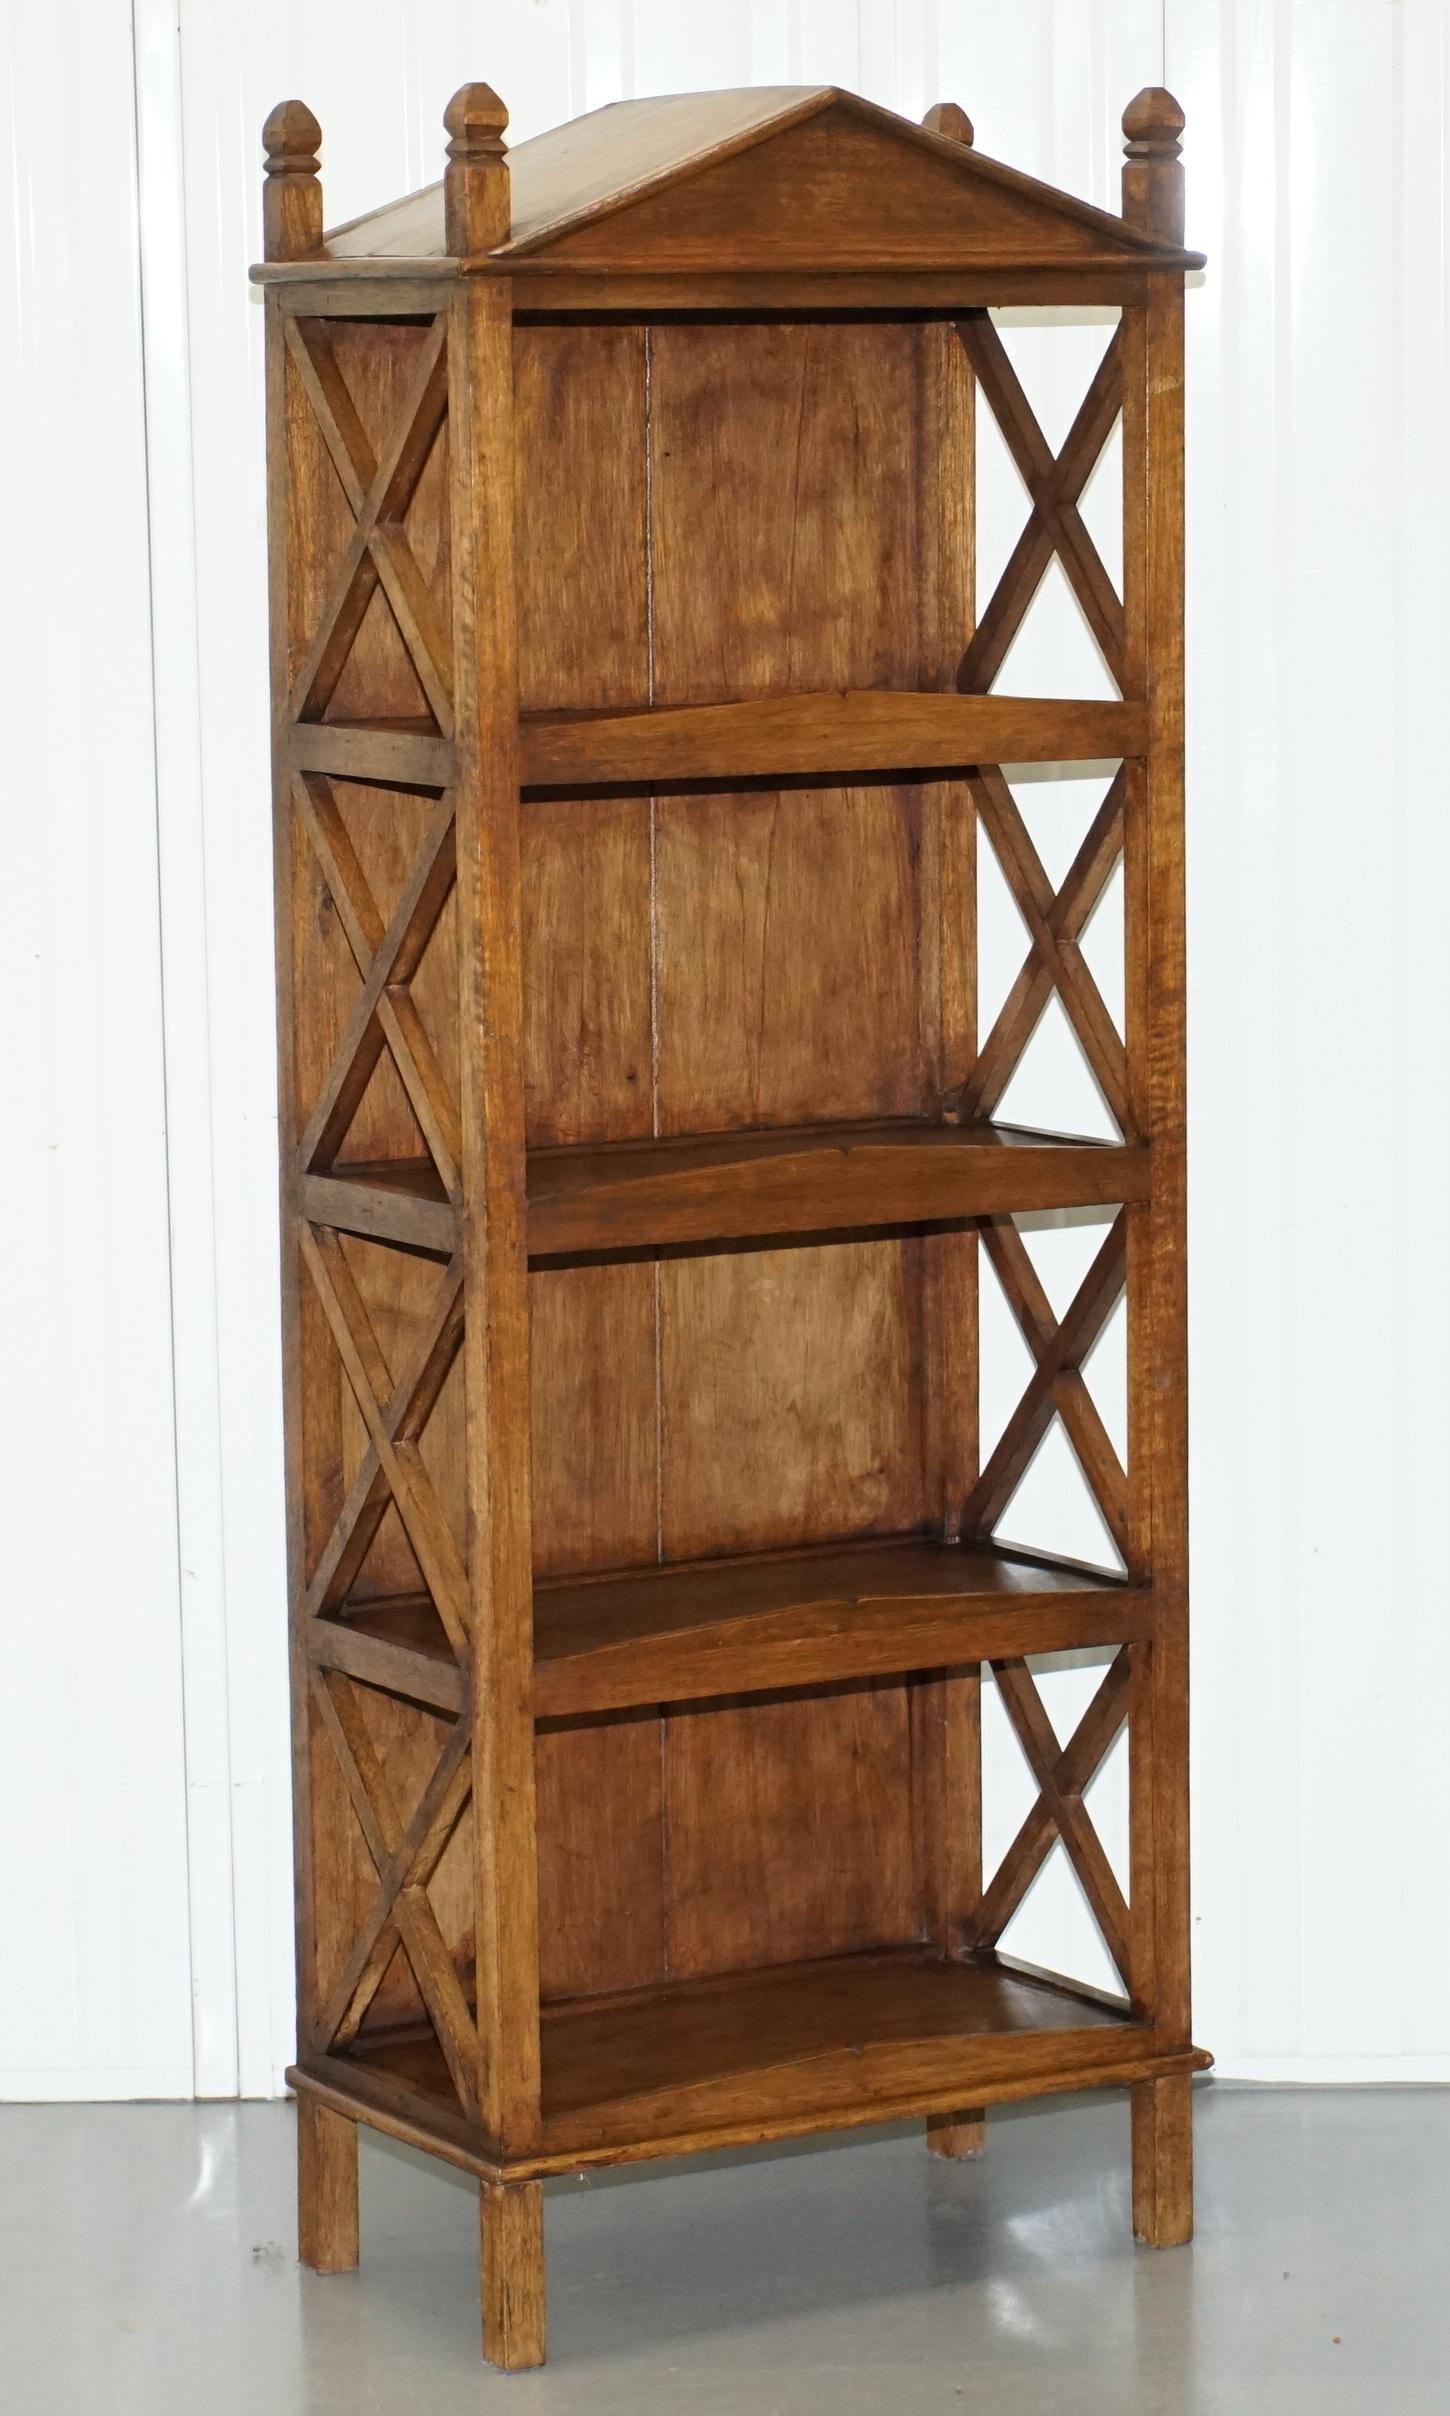 We are delighted to offer for sale this lovely pair of steeple top bookcases in solid wood

A very well made and decorative pair of open bookcases, great for displaying trinkets

We have cleaned waxed and polished them from top to bottom, they